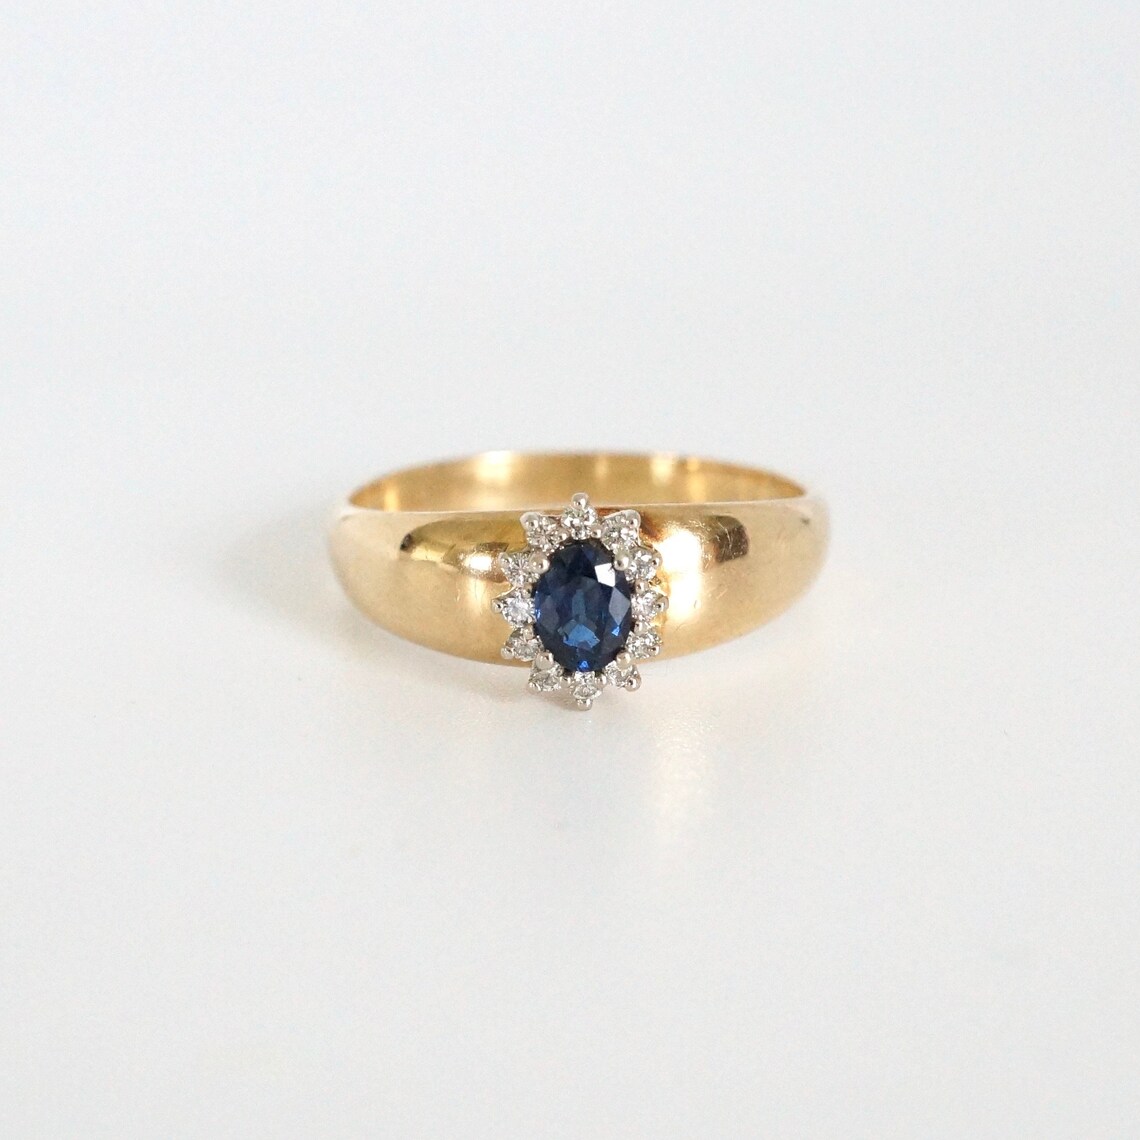 Vintage Sapphire Engagement Ring from Birks Sapphire Halo | Etsy